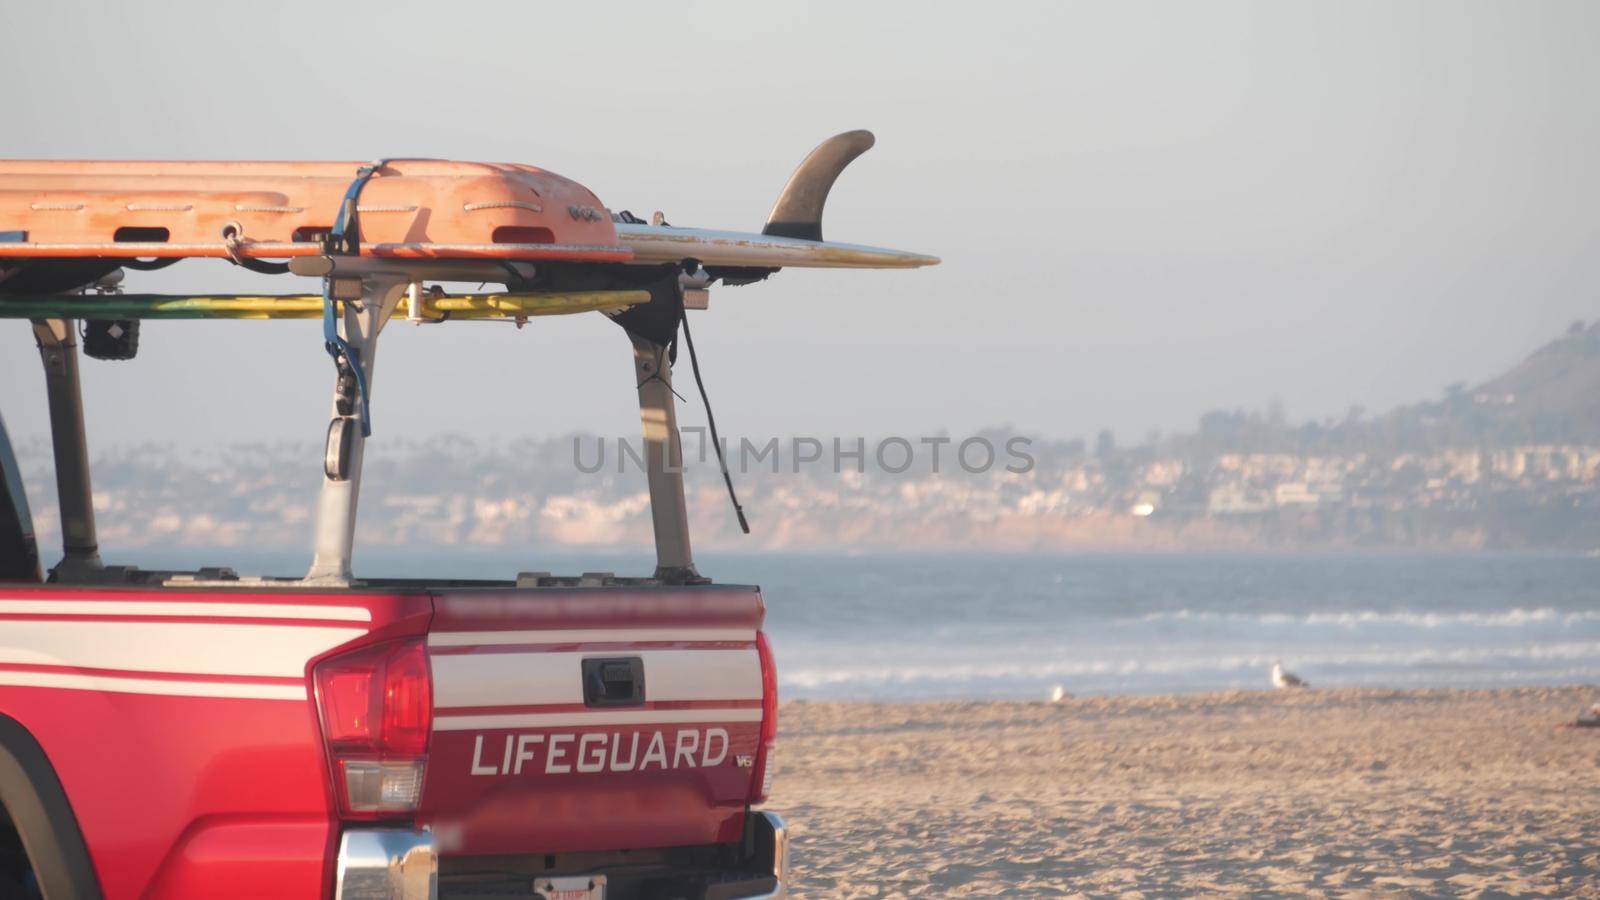 Lifeguard red pickup truck, life guard auto on sand, California ocean beach USA. Rescue pick up car on coast for surfing safety, lifesavers 911 vehicle and sea waves of Mission beach near Los Angeles.